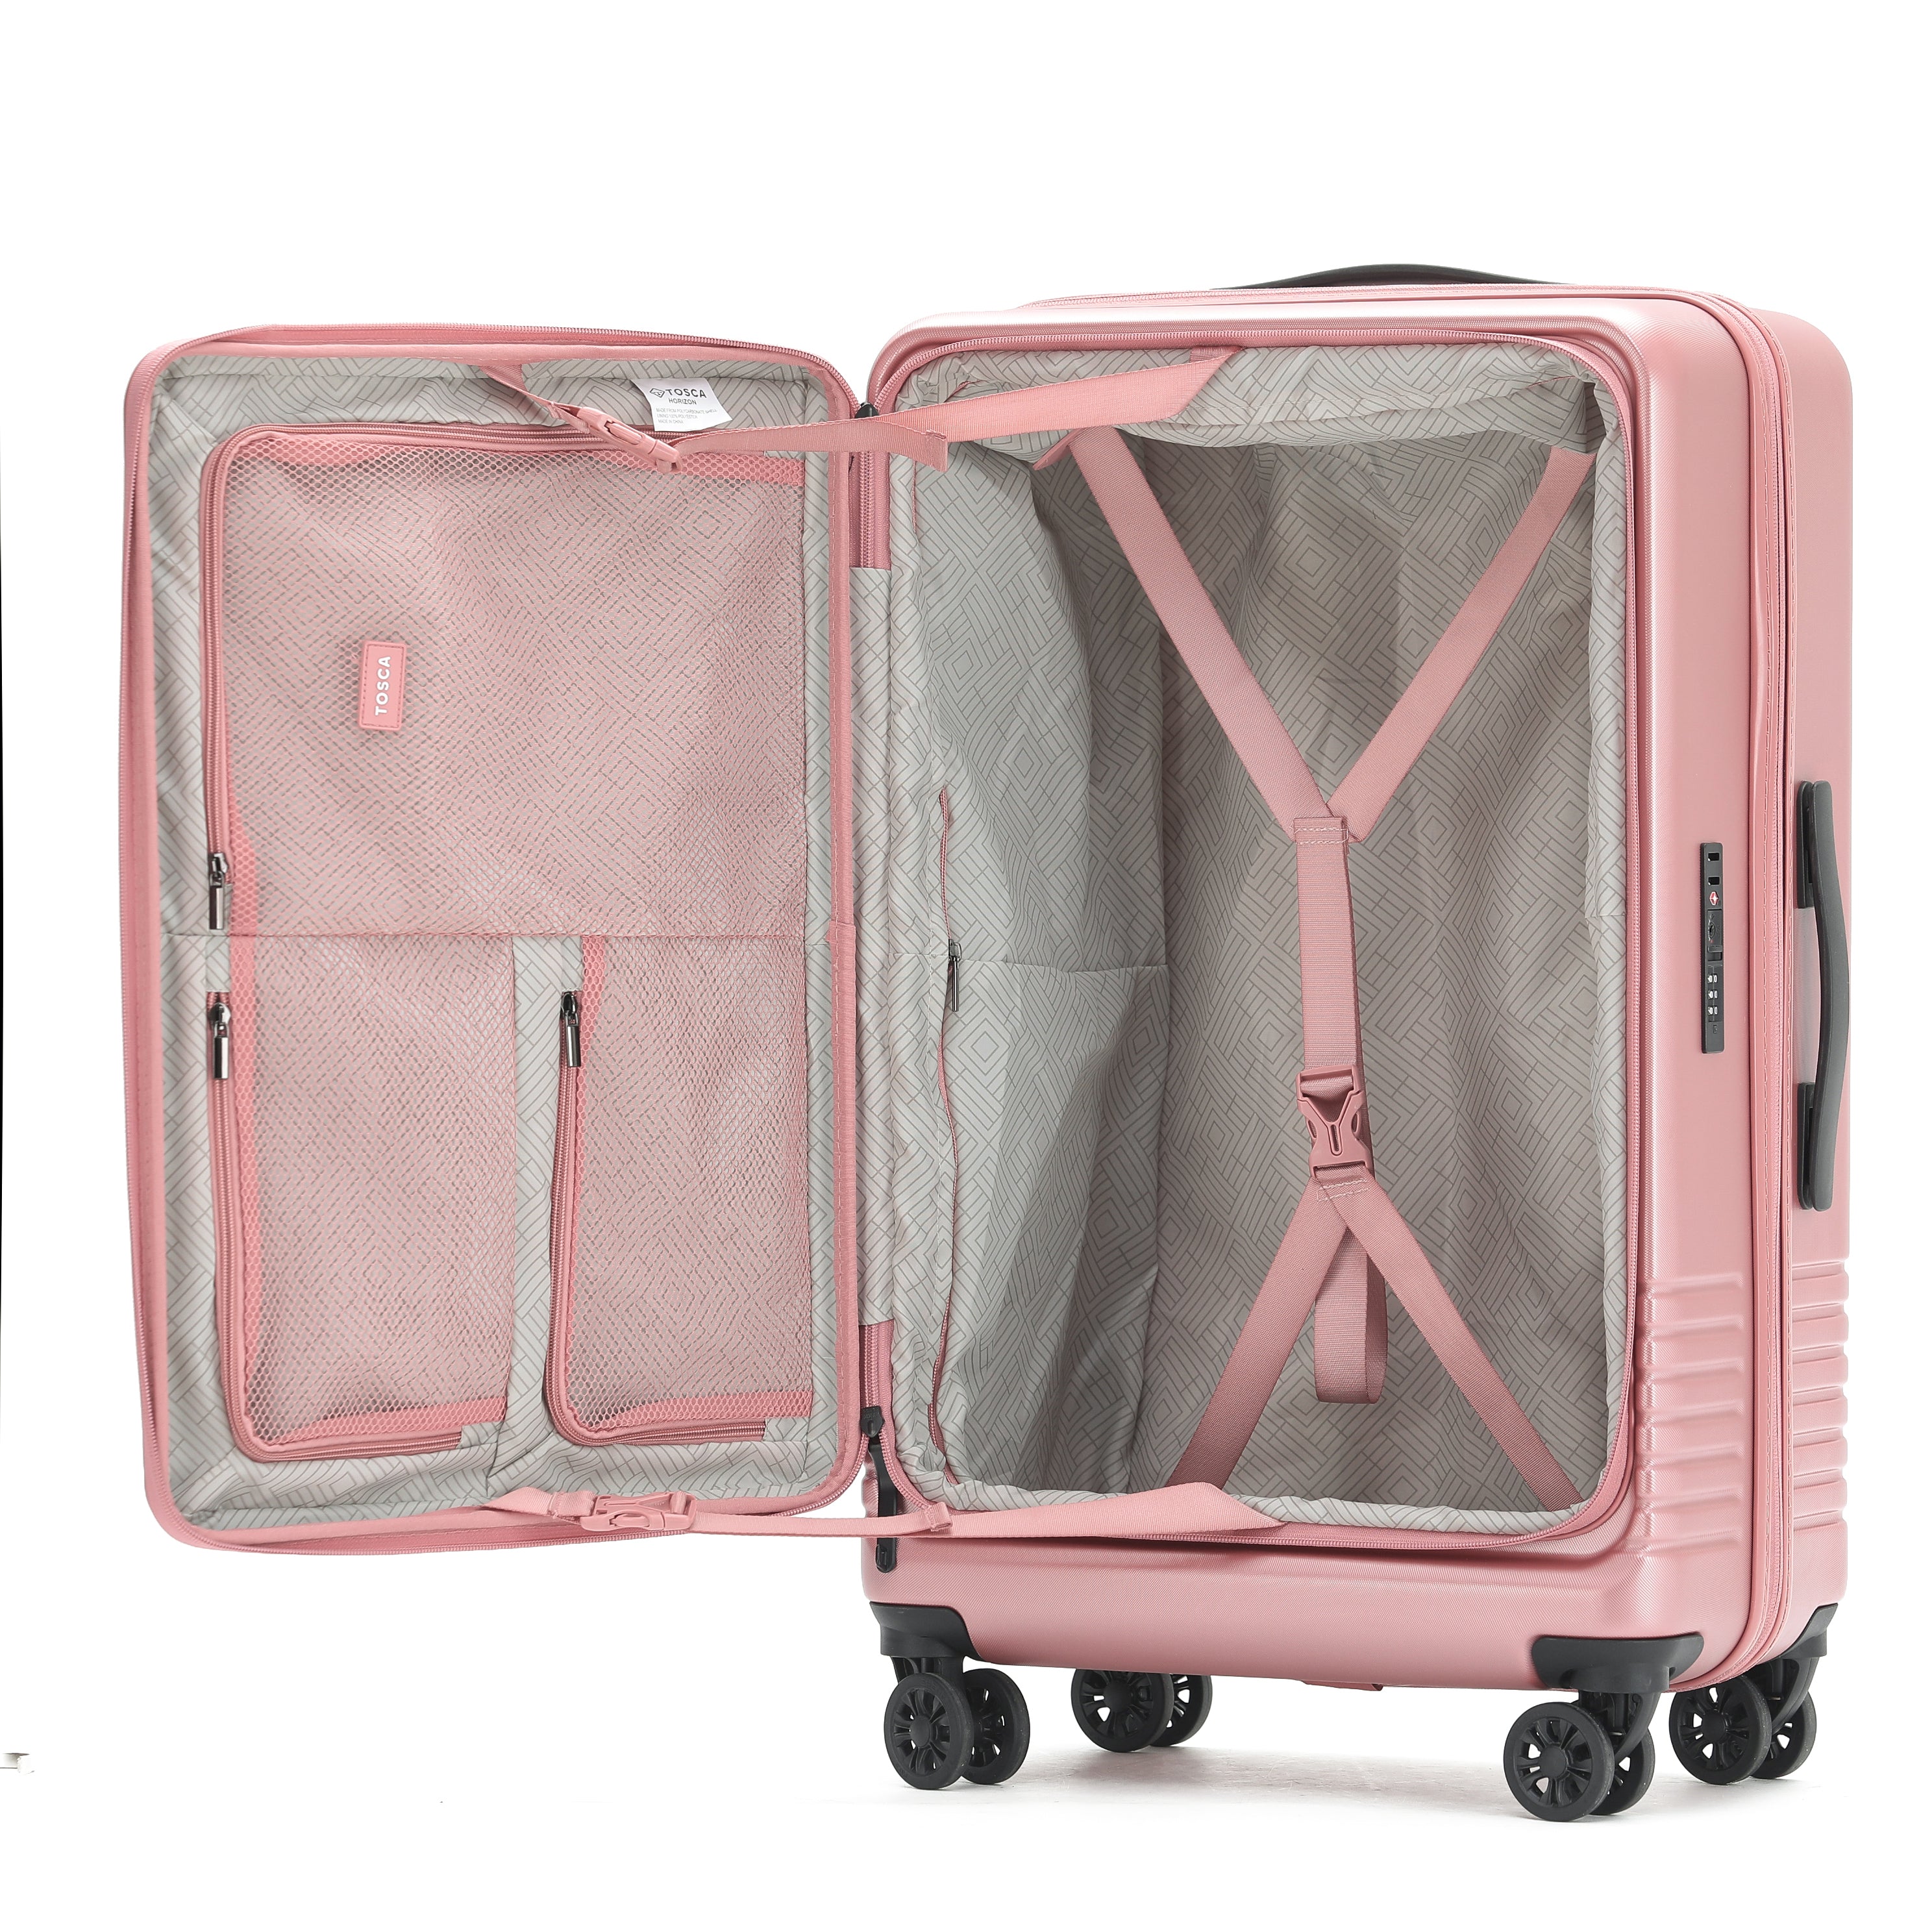 Tosca - TCA644 Horizon Front lid opening Set of 3 suitcases - Dusty Rose-10